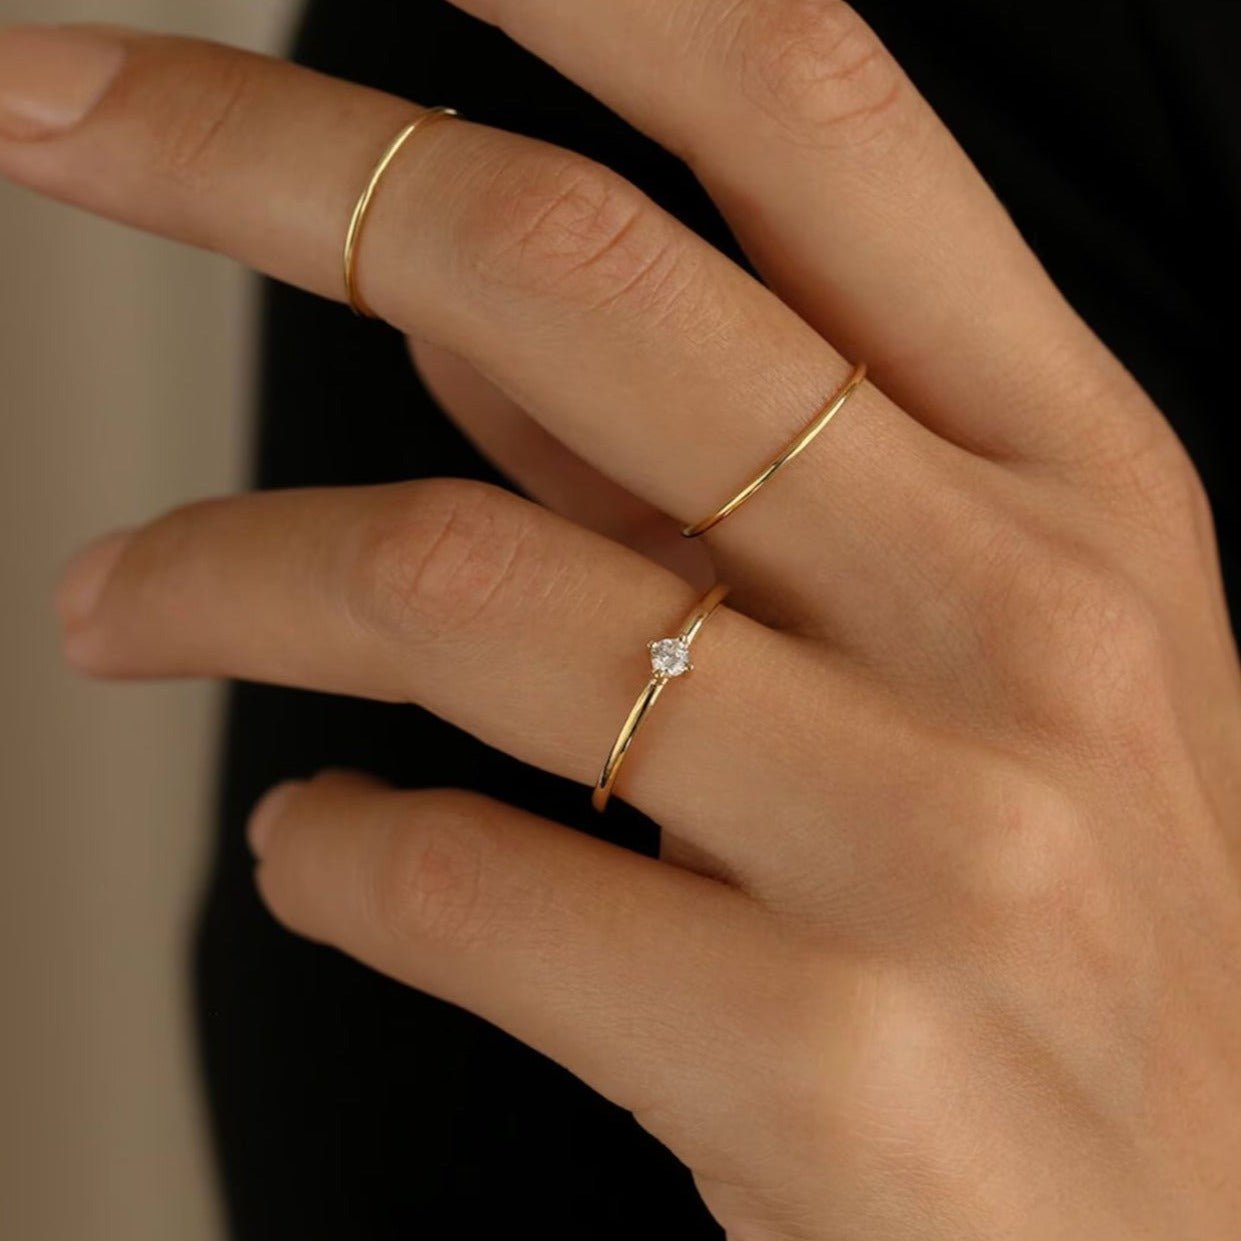 Aesthetic rings gold ring set from 1 oak jewelry